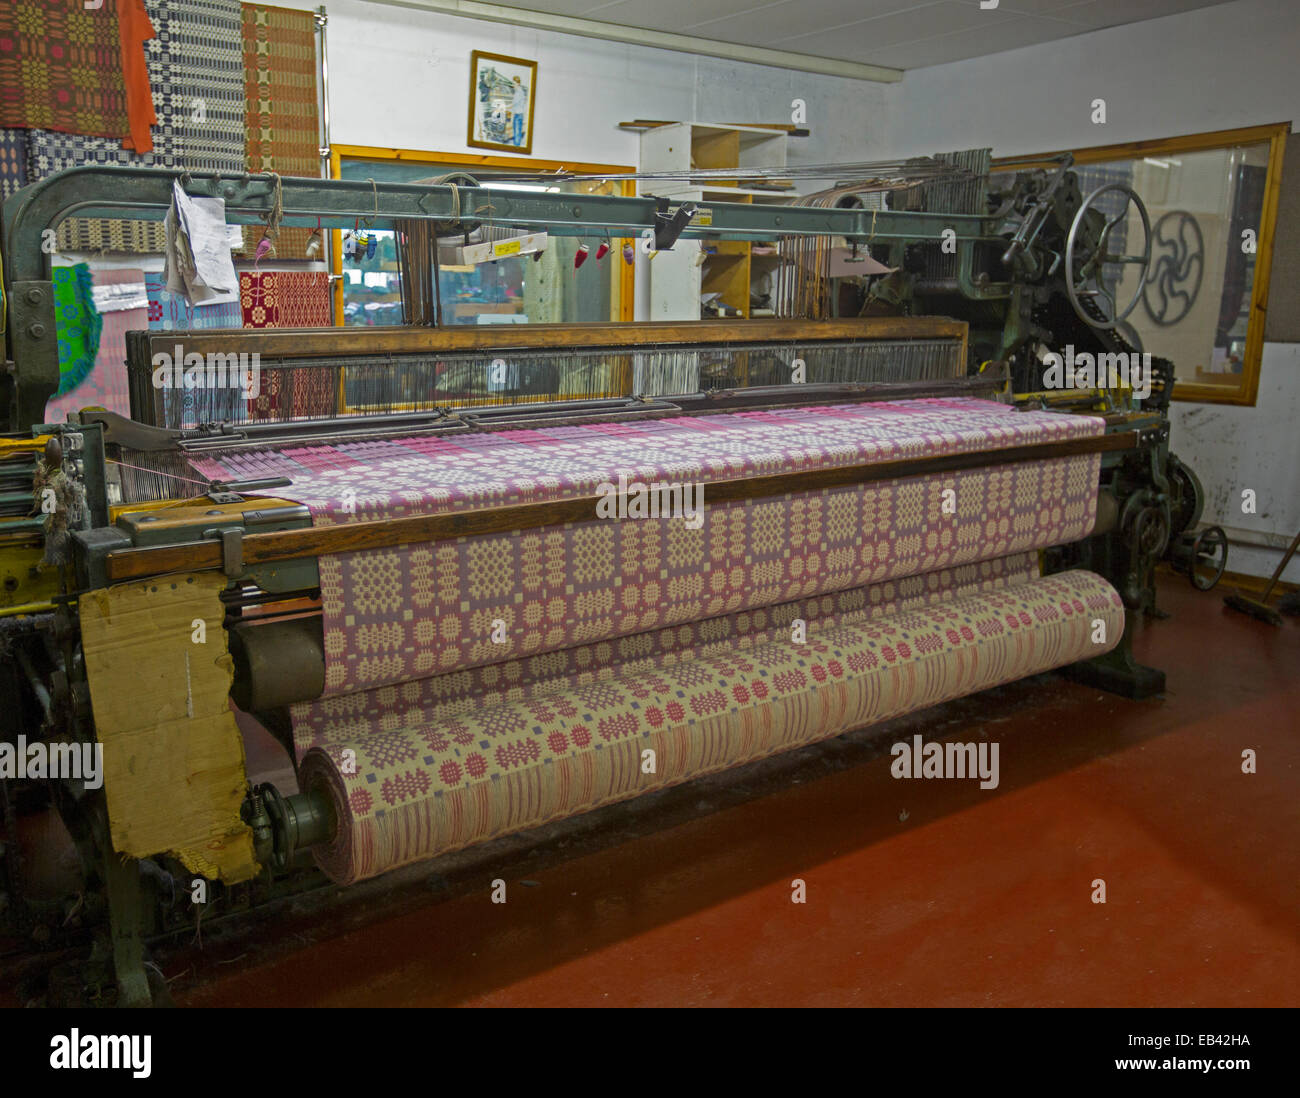 Large commercial loom with patterned fabric for bedspread being woven, Trefriw Woollen Mills, popular tourist attraction, Wales Stock Photo